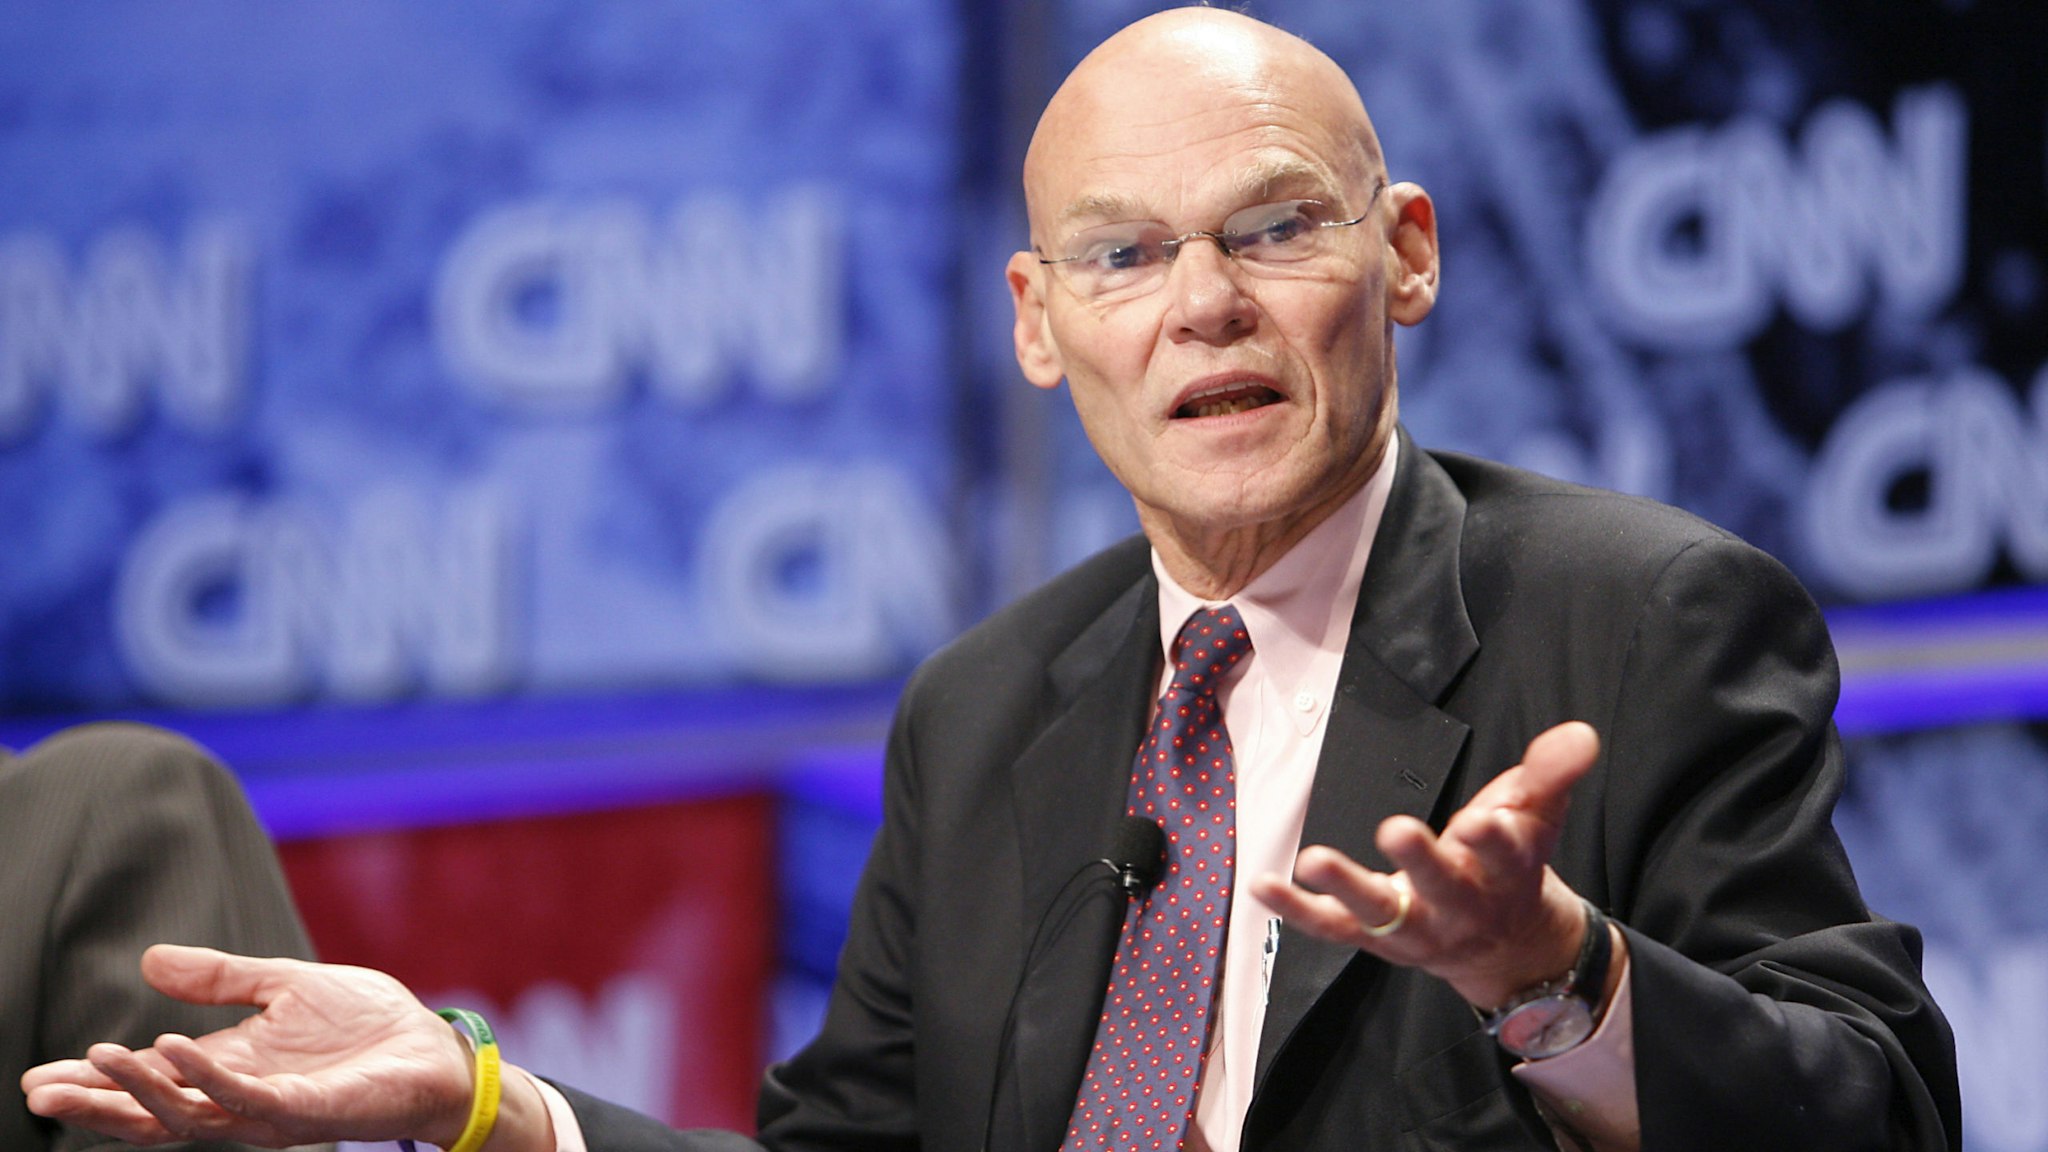 14888_232.jpg_James Carville at the CNN Election Breakfast 2007 at Gotham Hall on October 16, 2007 in New York City.